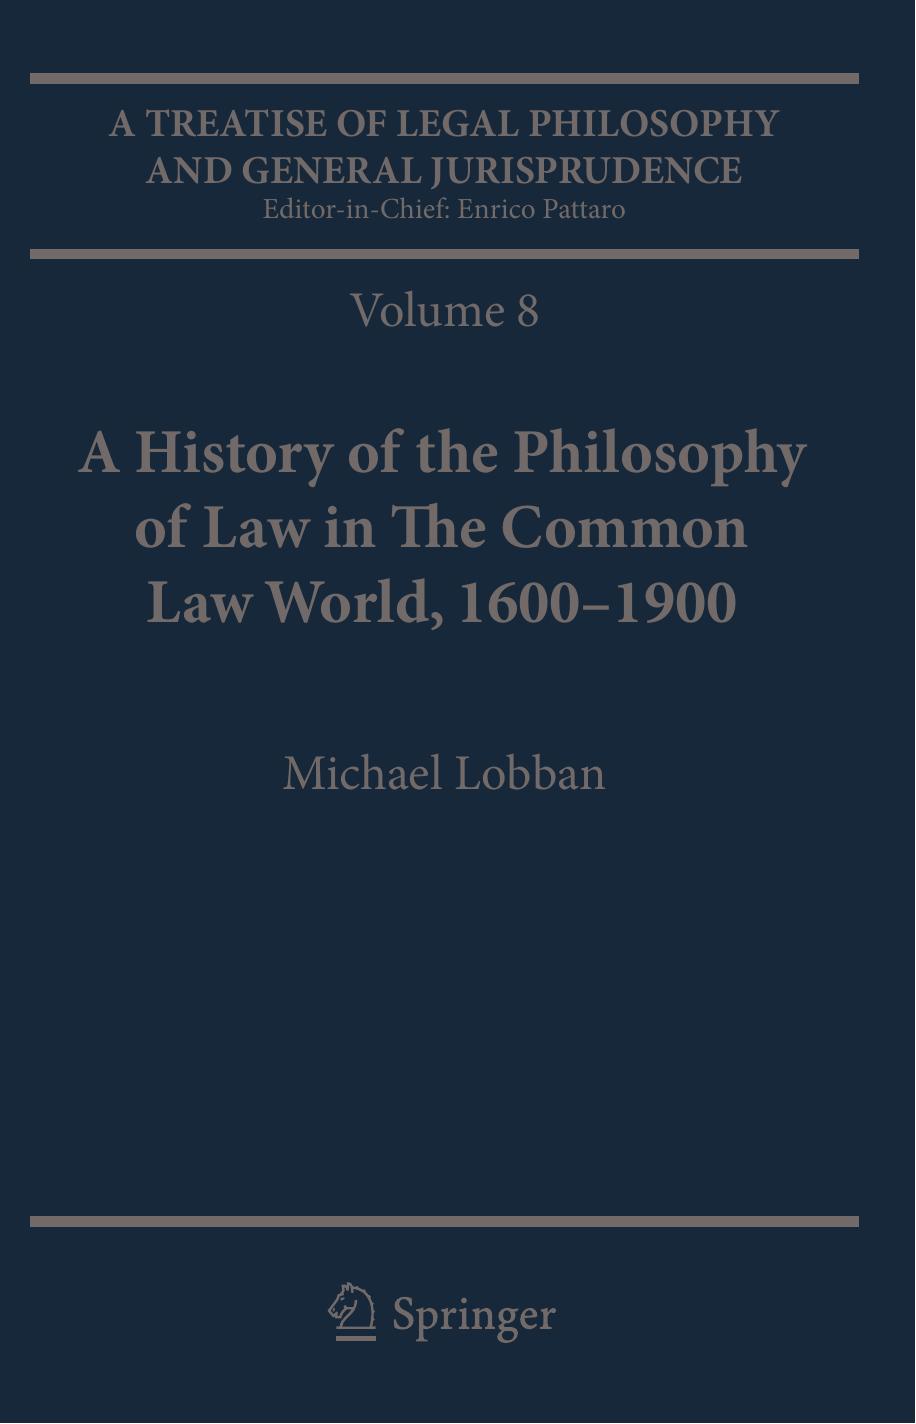 A Treatise of Legal Philosophy and General Jurisprudence: Volume 7: The Jurists’ Philosophy of Law From Rome to the Seventeenth Century, Volume 8: A History of the Philosophy of Law in the Common Law World, 1600–1900